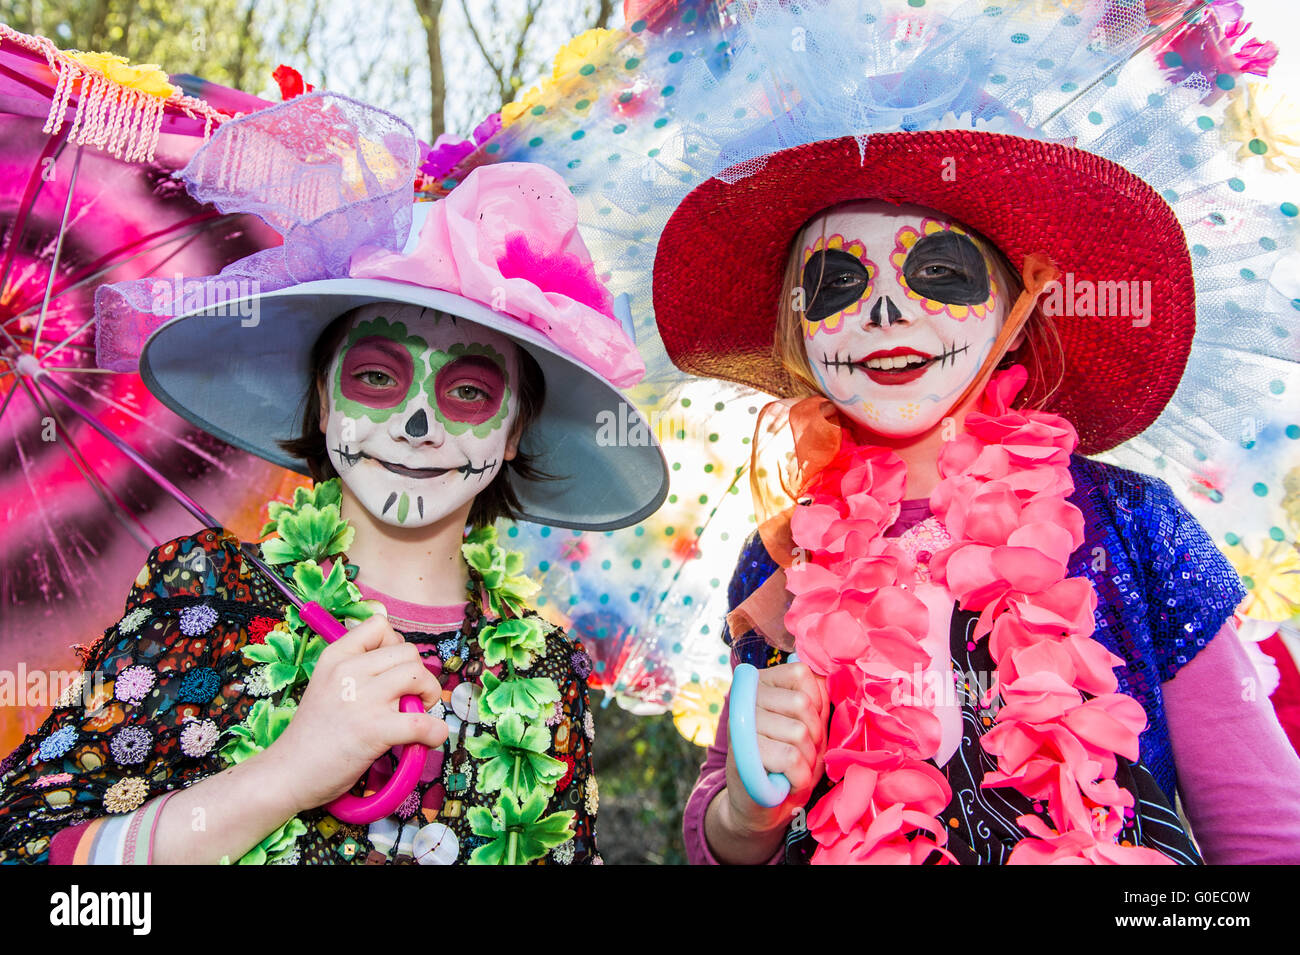 Ballydehob, Ireland. 30th April 2016. Dressed up and faces painted for the Ballydehob Jazz Festival 'Day of the Dead' themed New Orleans Style Jazz Funeral were Amy Catalina-Wilde from Schull and Olwyn McGrath from Ballydehob. Credit: Andy Gibson/Alamy Live News Stock Photo